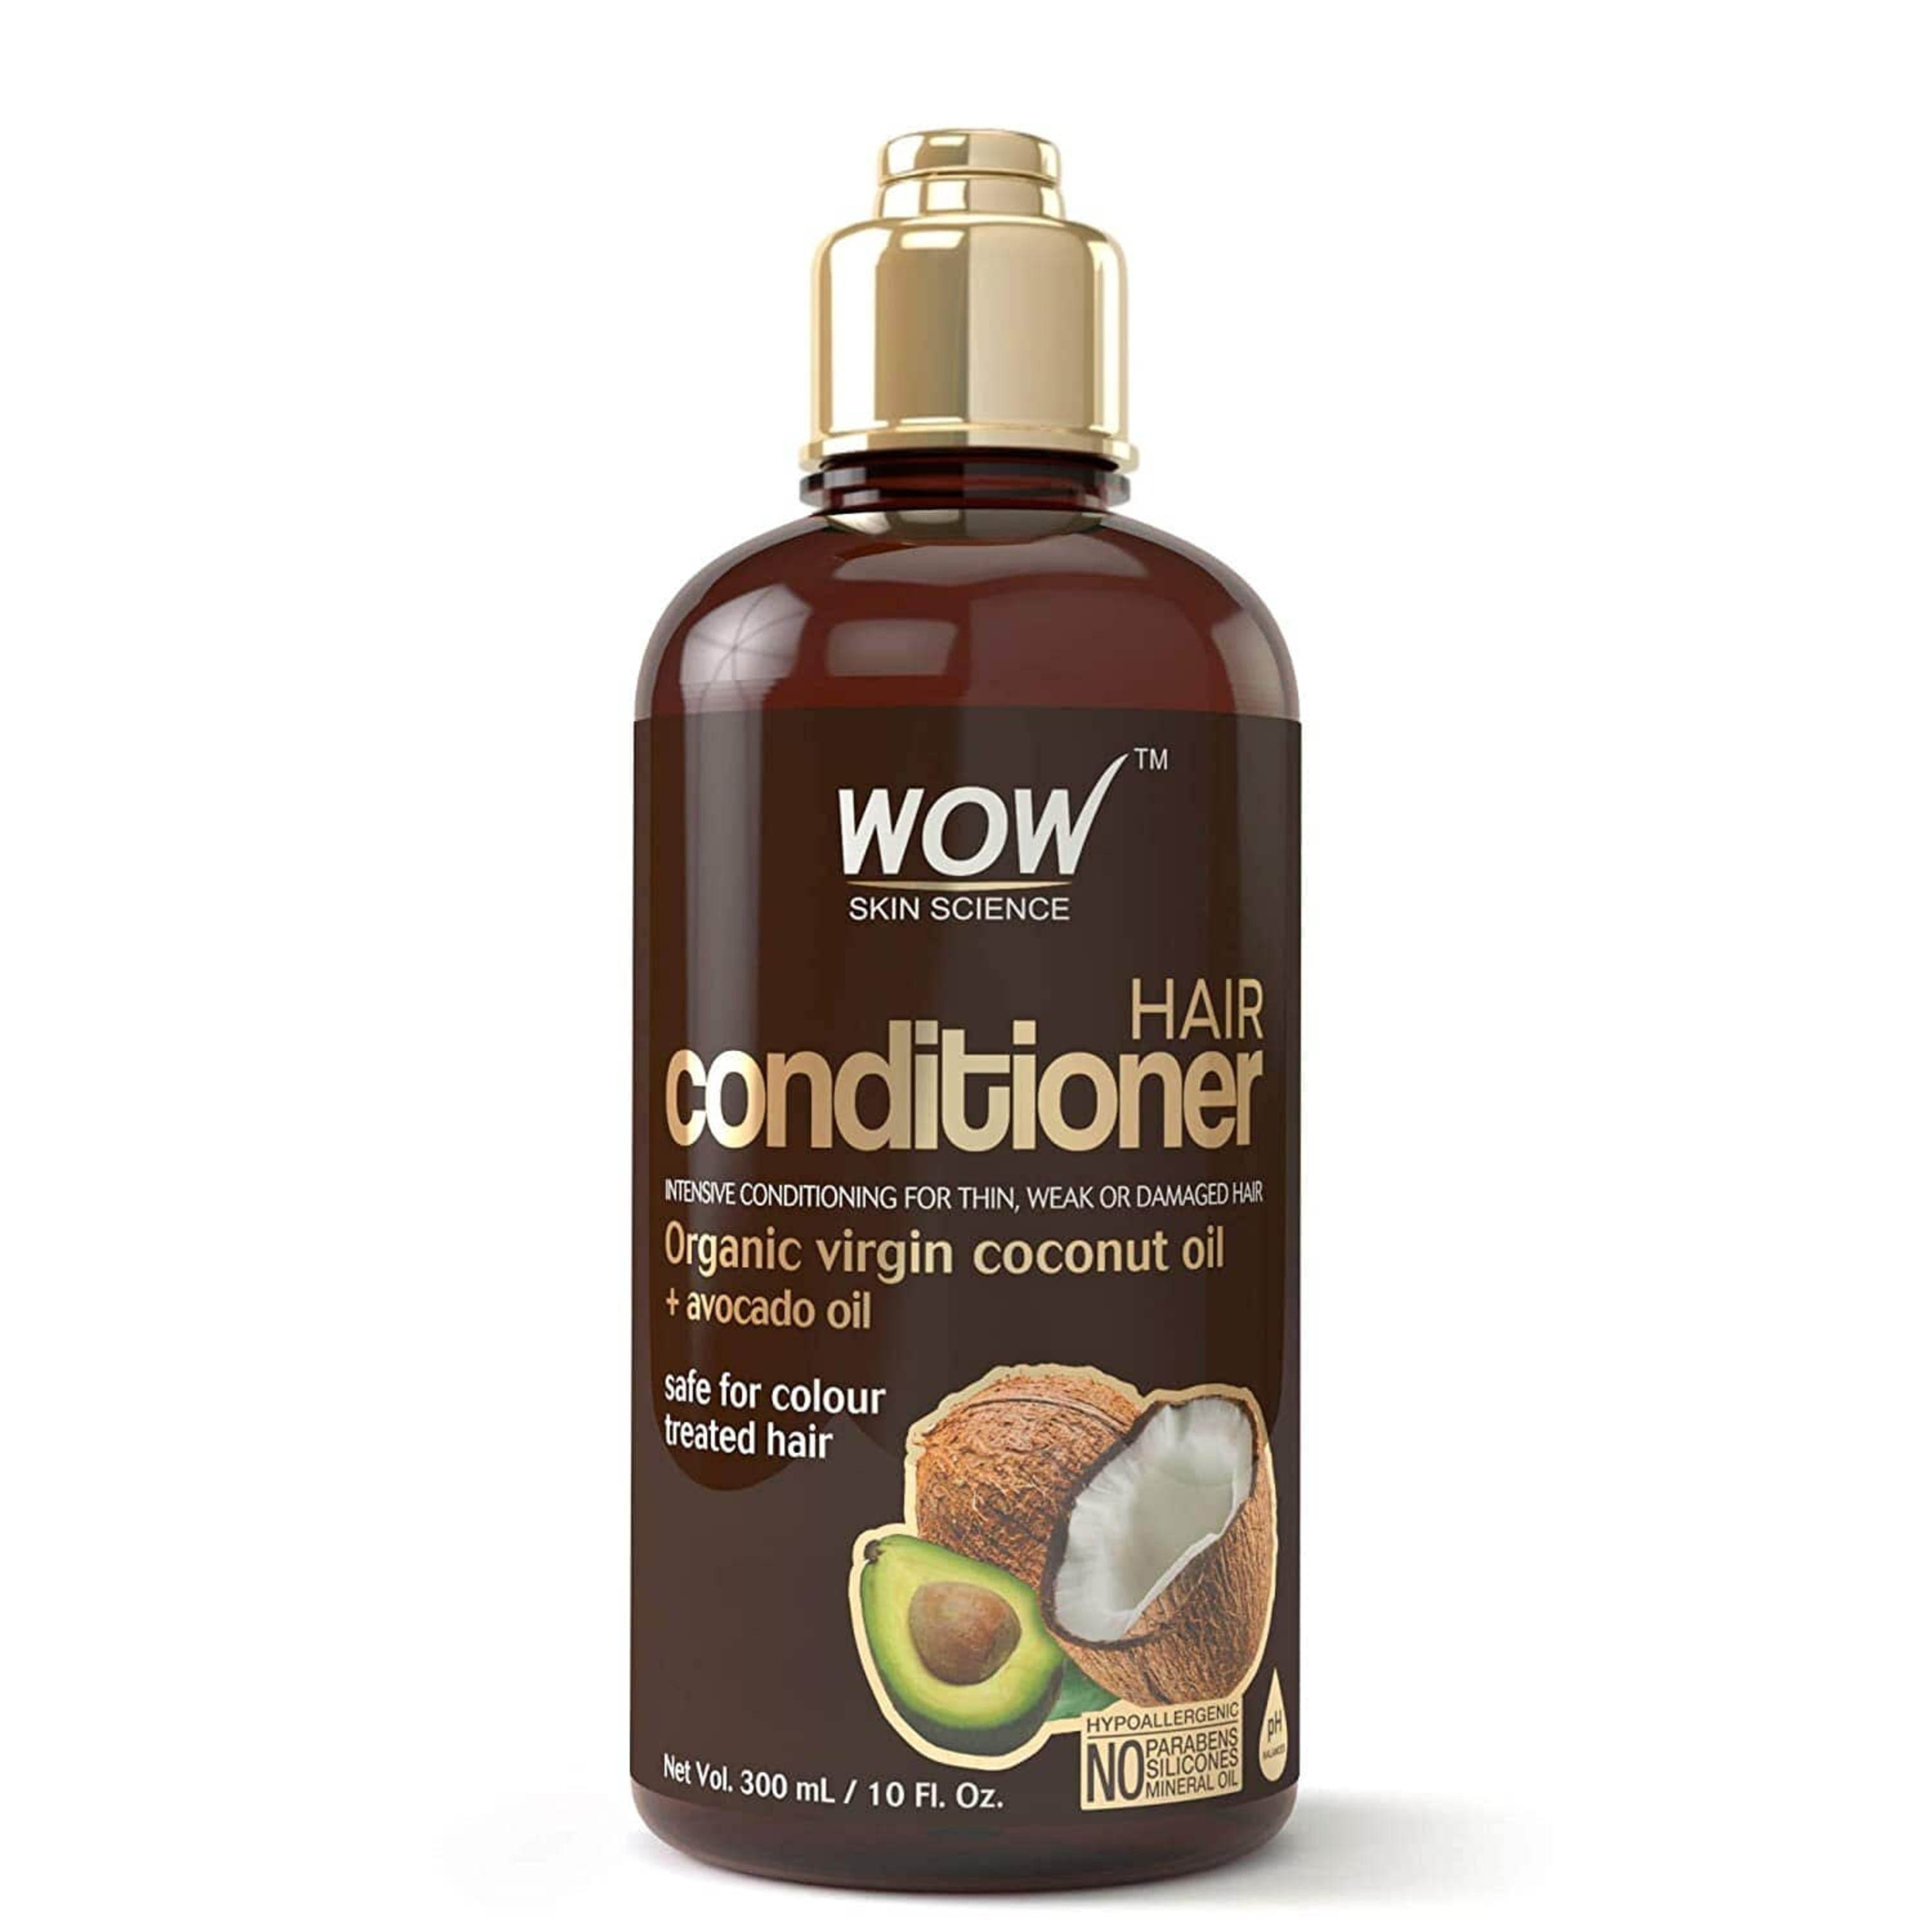 WOW Skin Science Coconut and Avocado Oil Hair Conditioner - 300 mL